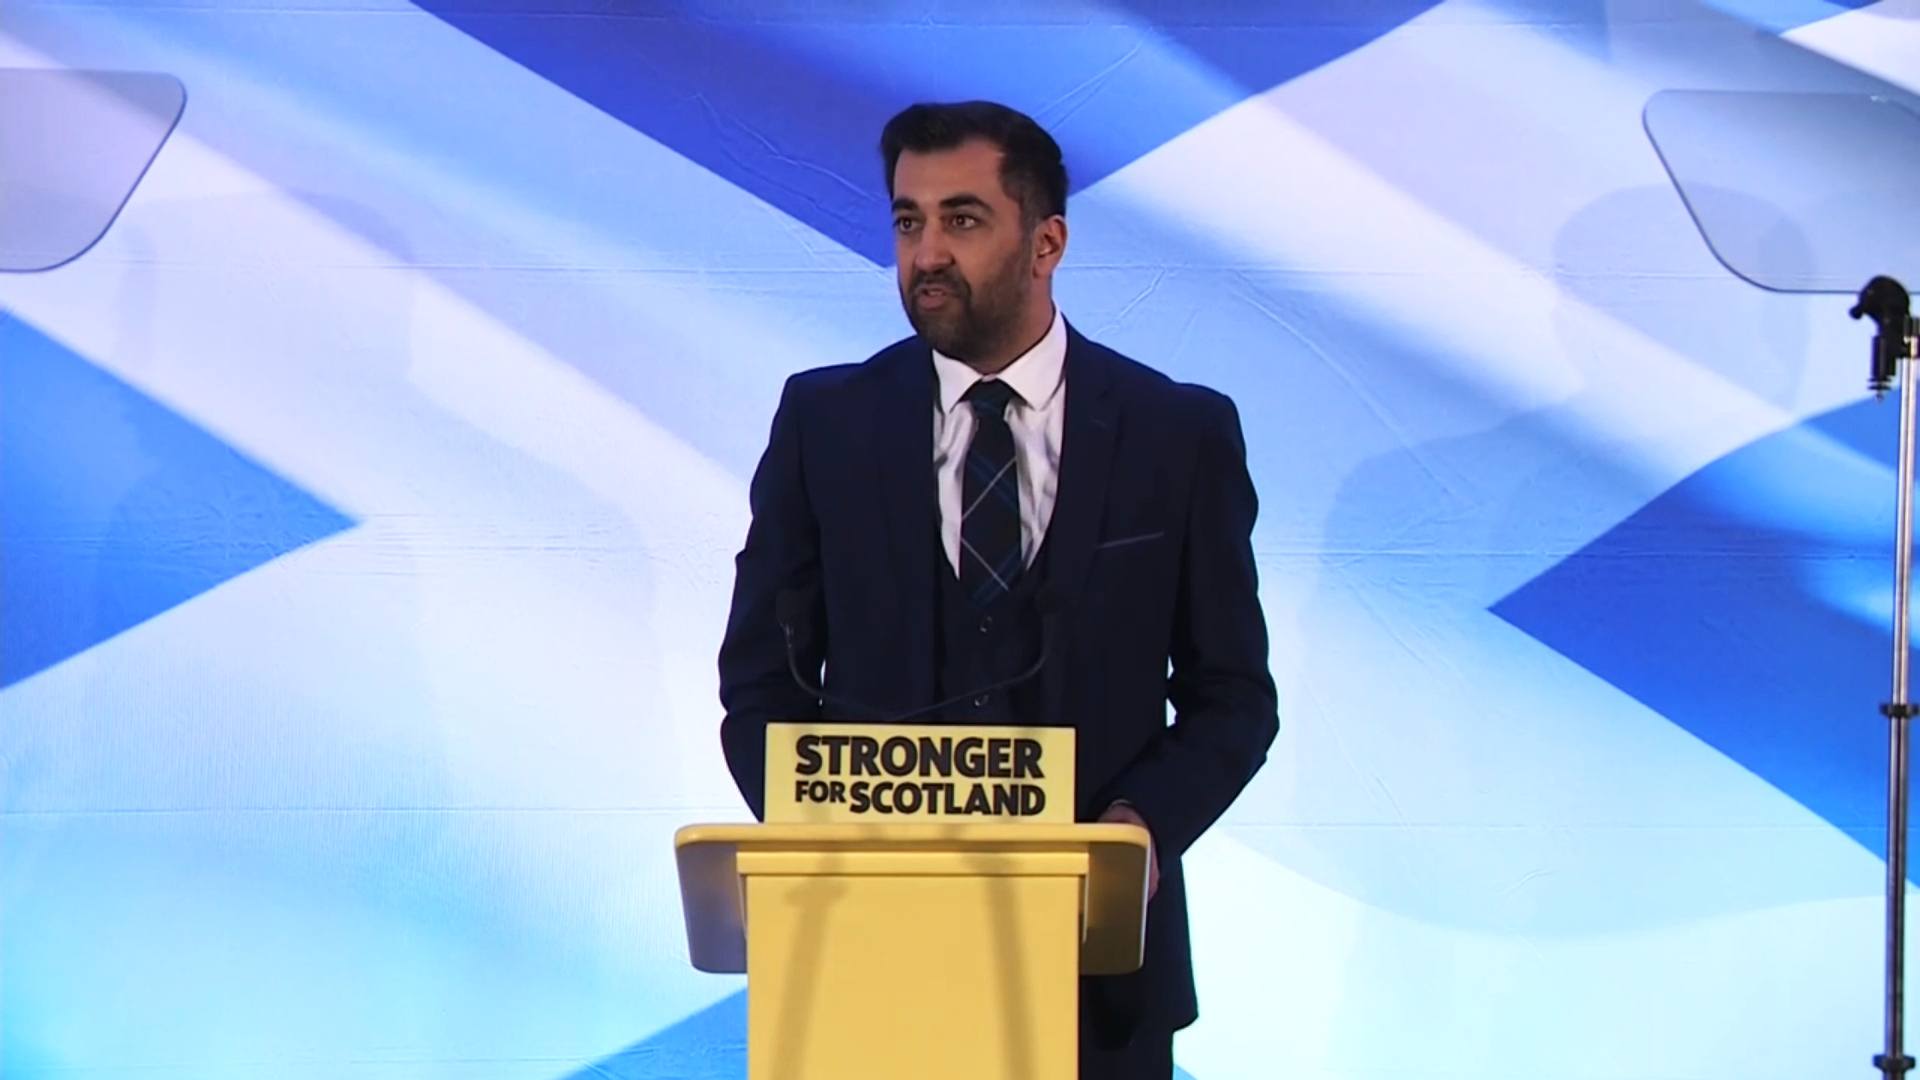 Humza Yousaf said he only found out that the party's auditors had quit once he became leader.